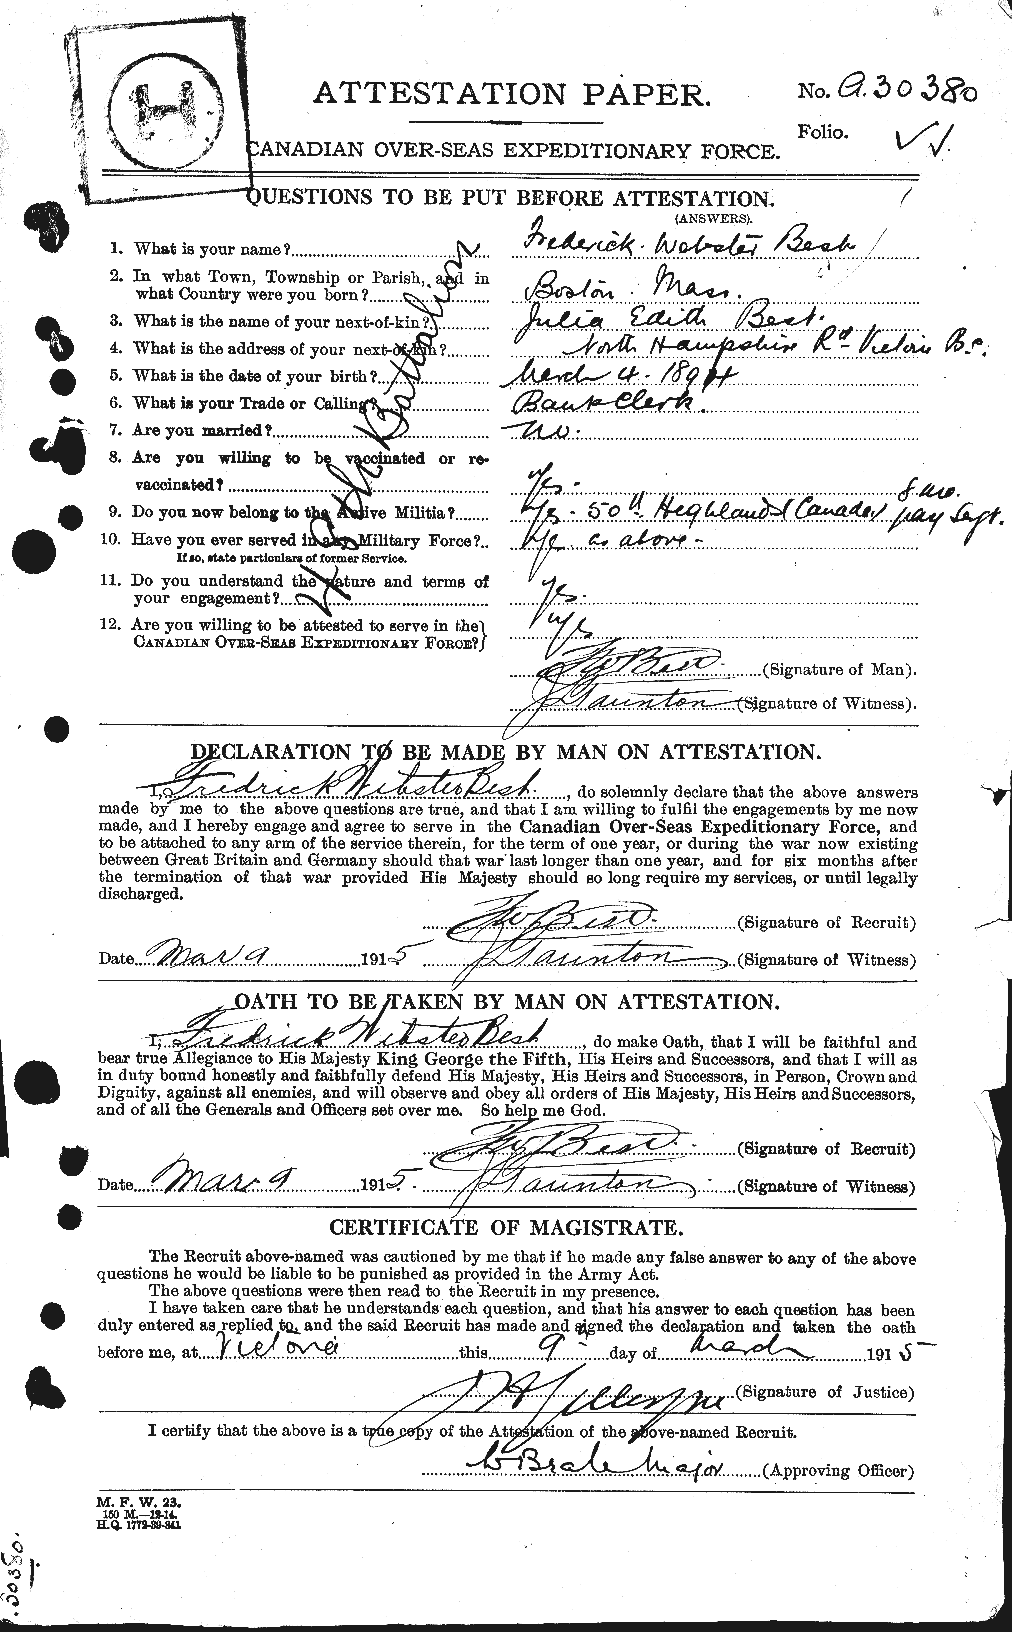 Personnel Records of the First World War - CEF 240253a